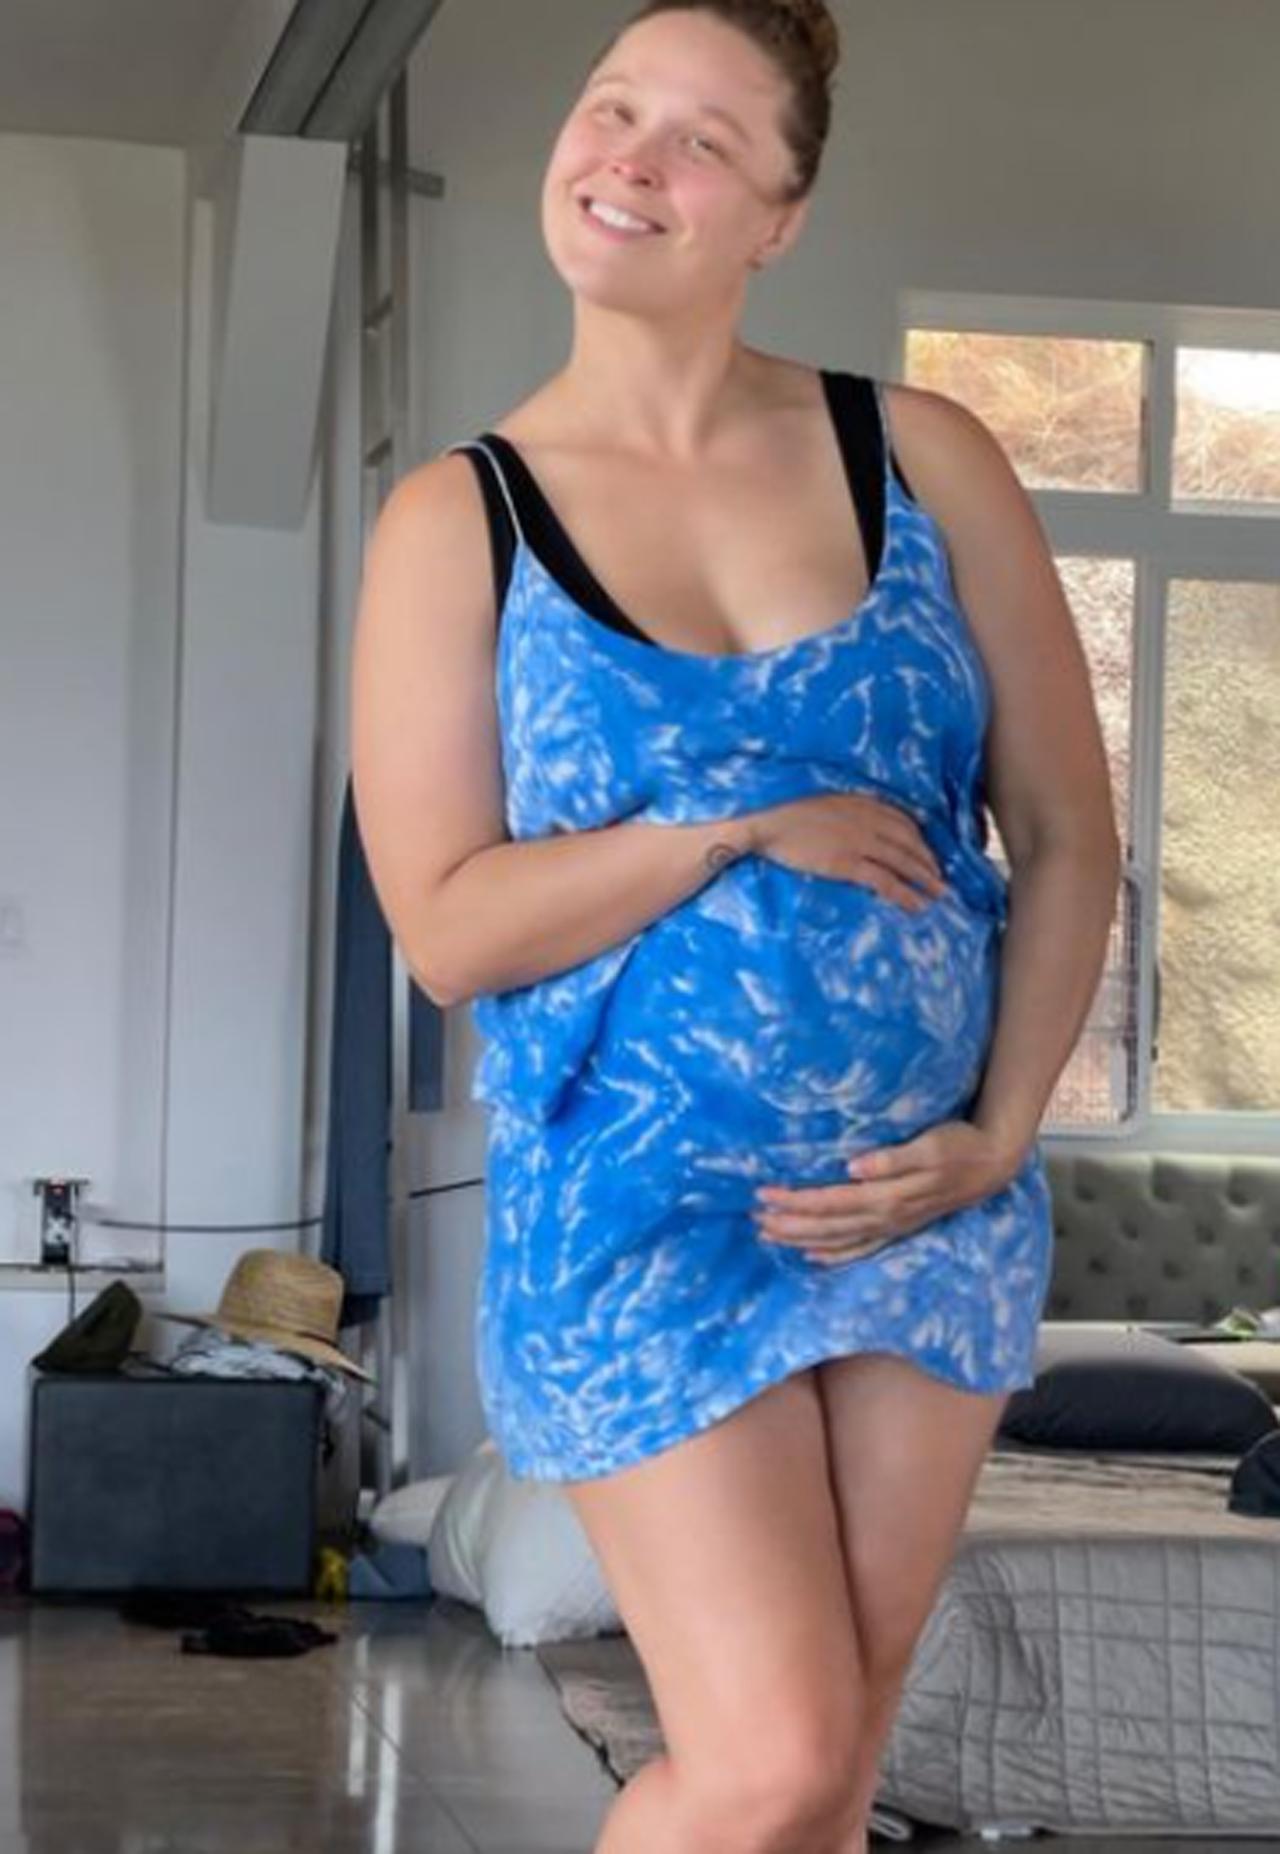 In April 2021, Ronda Rousey revealed on her official YouTube channel that she was pregnant. On Sept 28, 2021, Ronda Rousey gave birth to a baby girl.